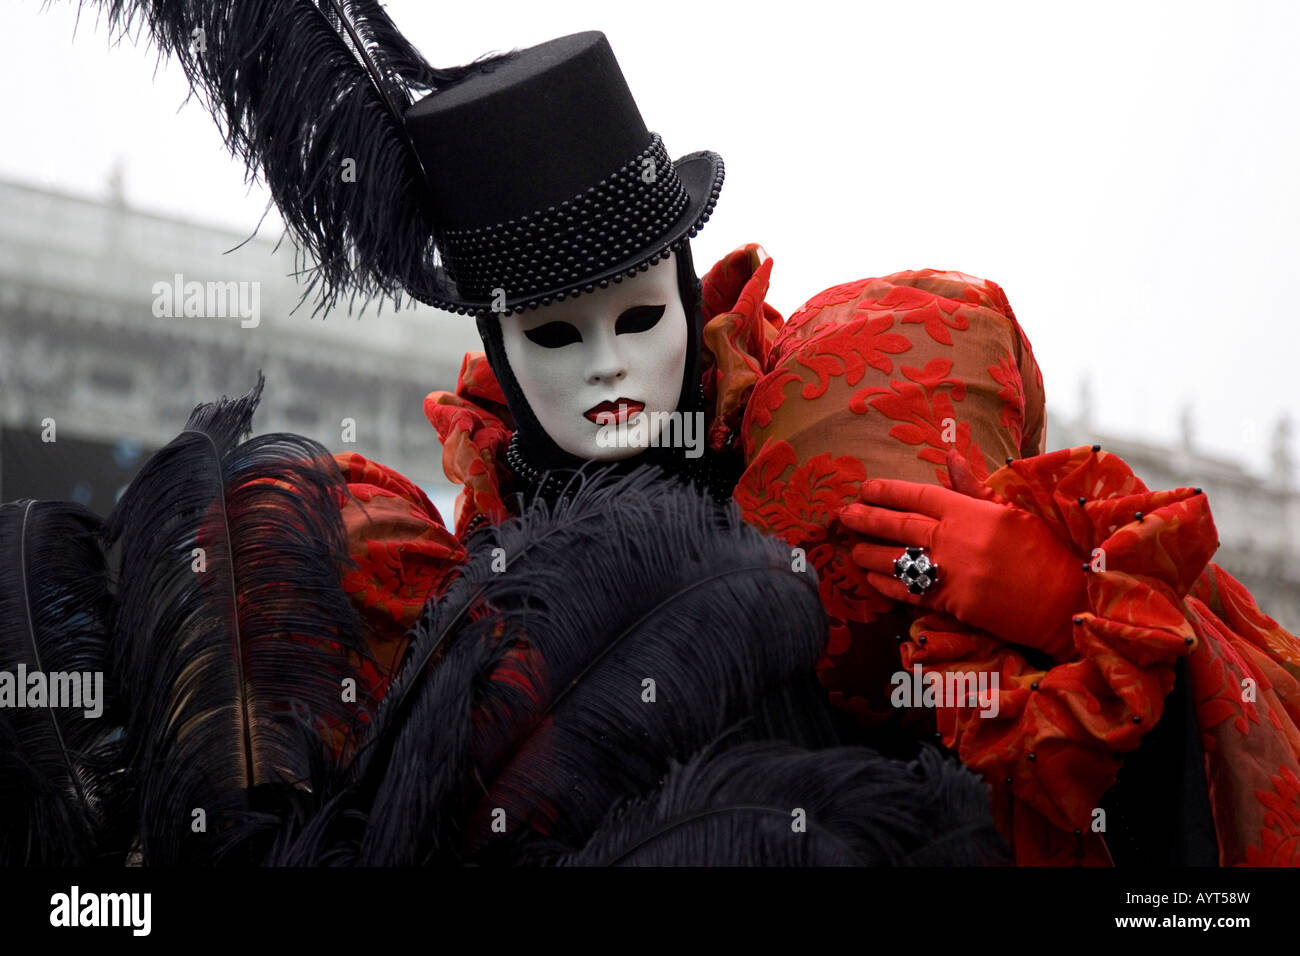 https://c8.alamy.com/comp/AYT58W/colourful-red-and-black-costume-and-large-top-hat-mask-and-feathers-AYT58W.jpg